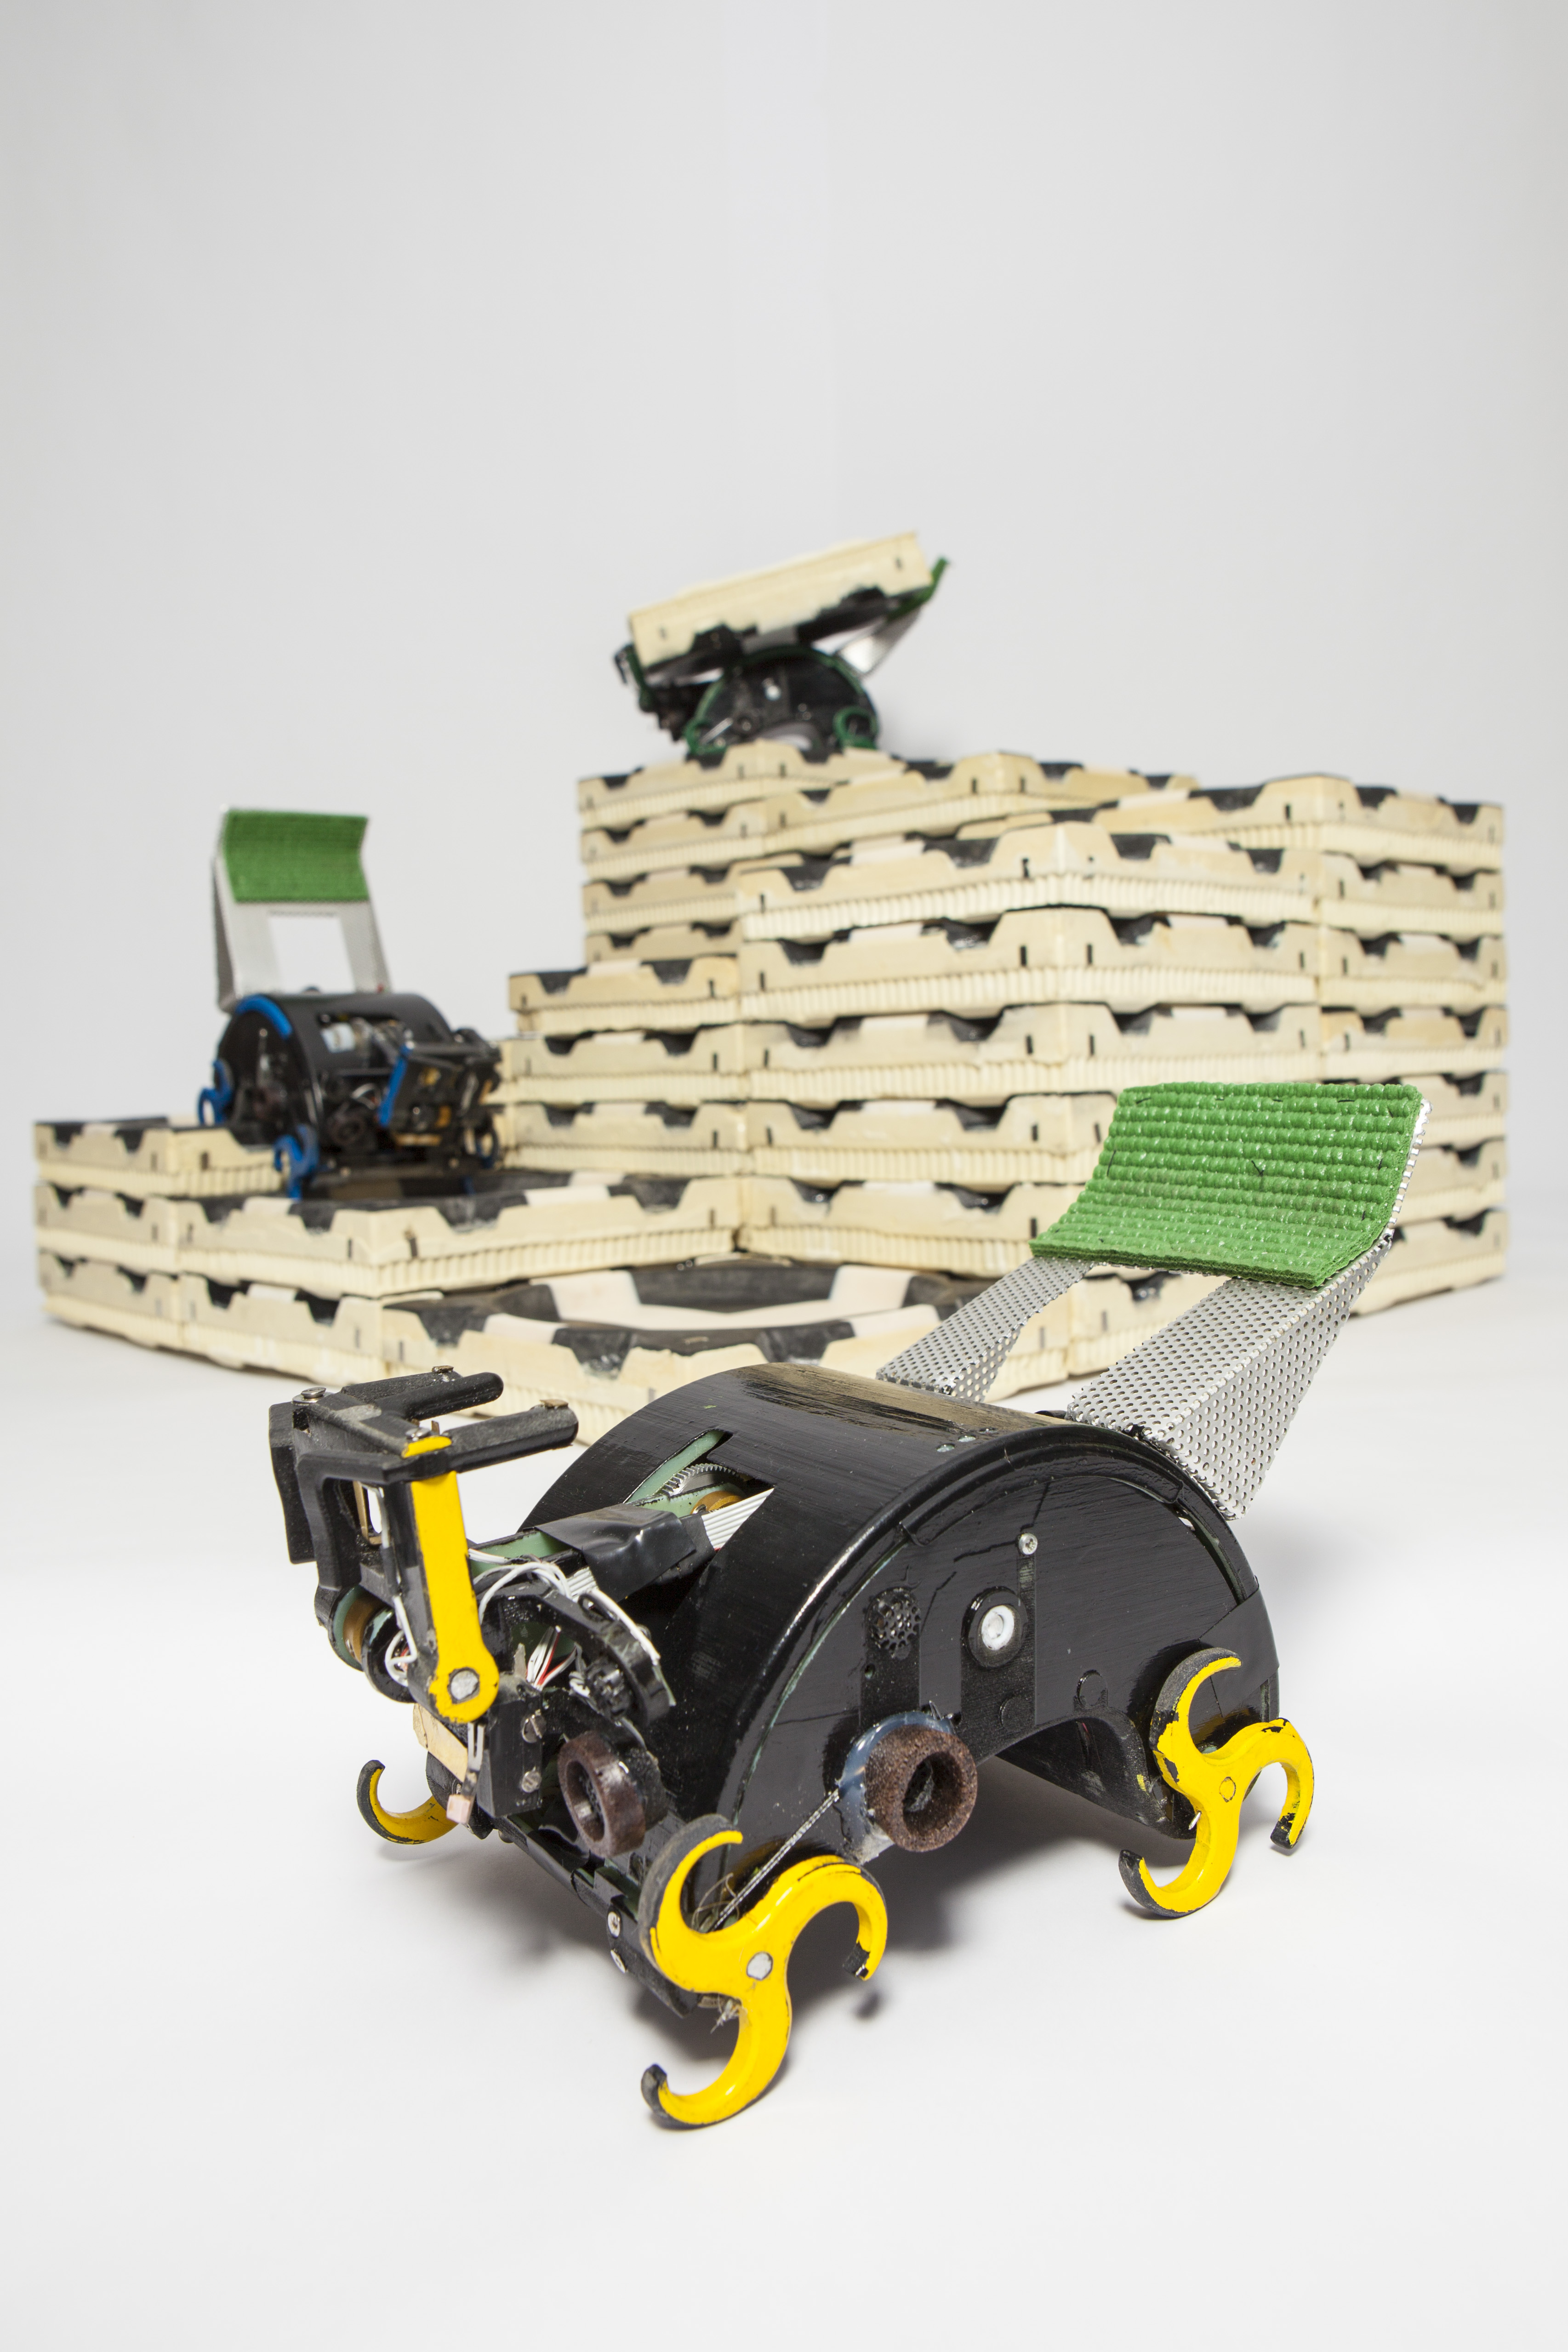 Termite-Inspired Robots for Collective Construction